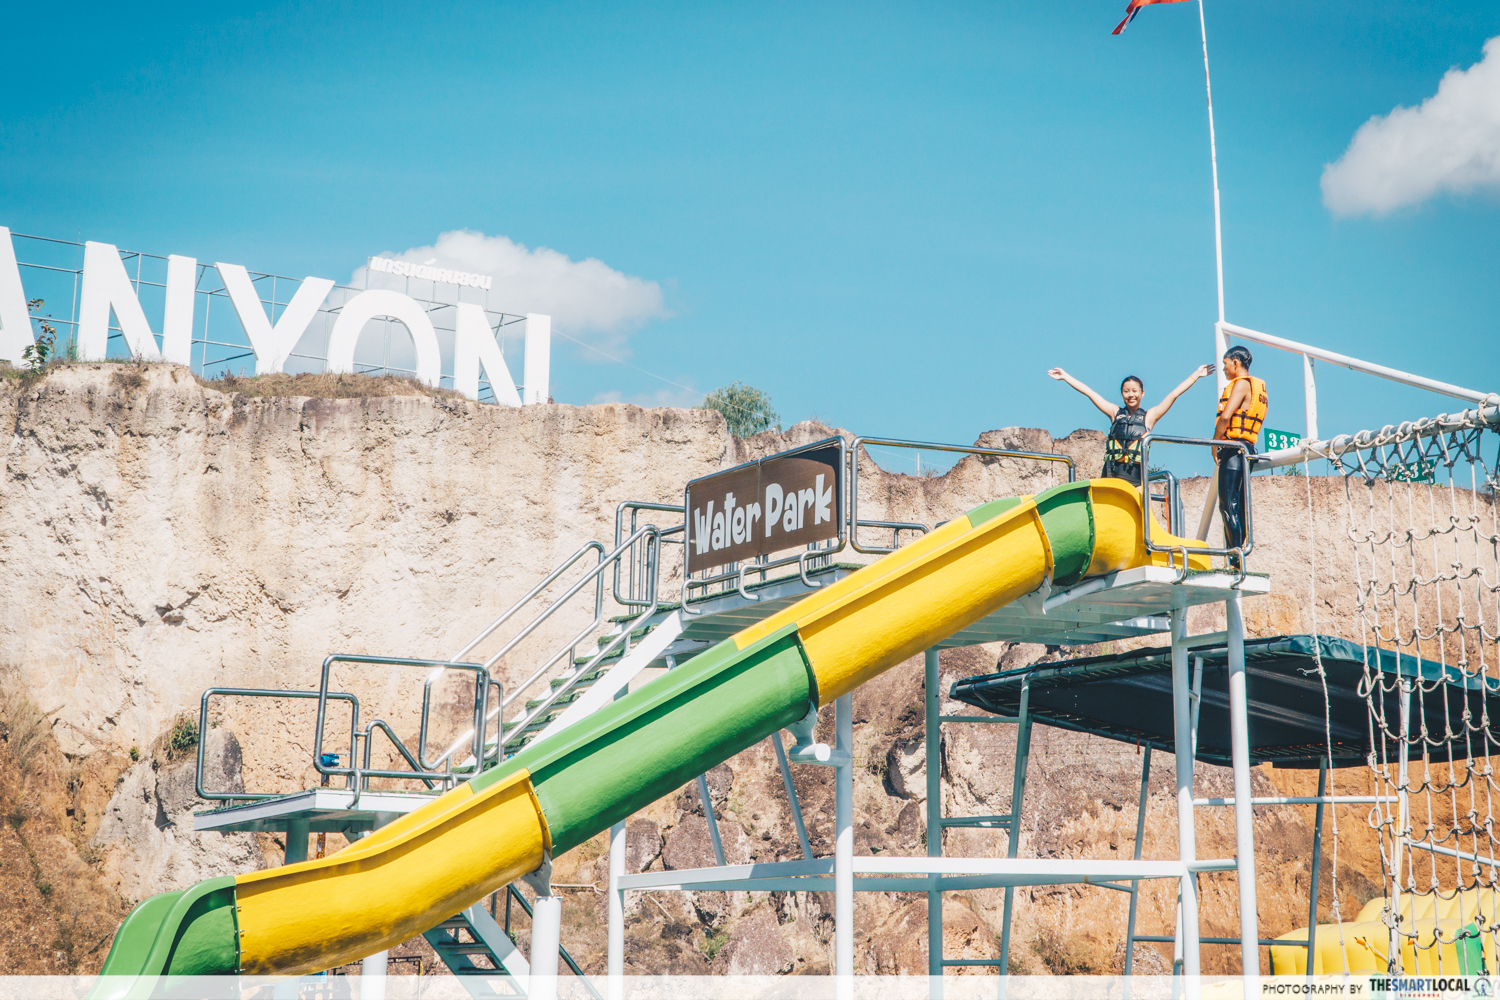 Grand Canyon Water Park - water slide